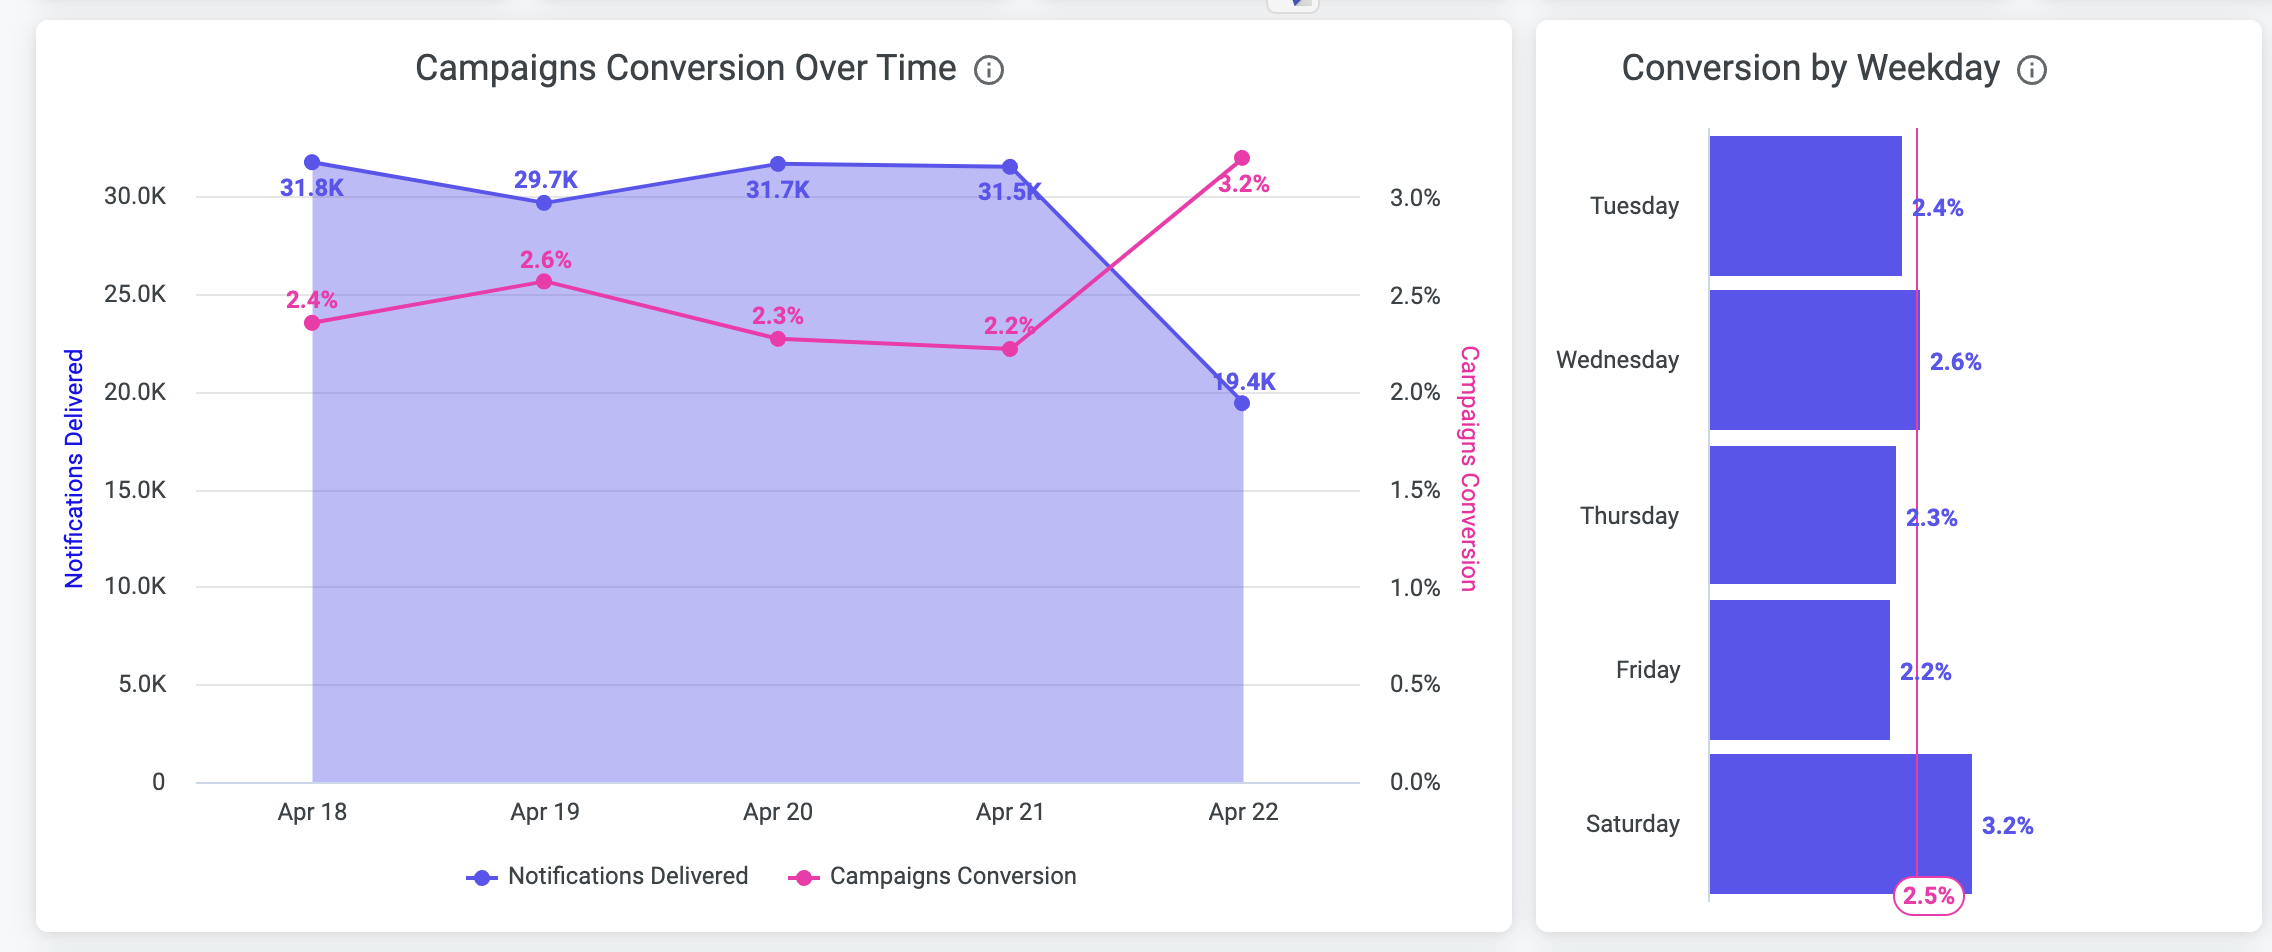 Campaigns Success Dashboard - Commerce Tab - Conversion Over Time  
click the image to enlarge